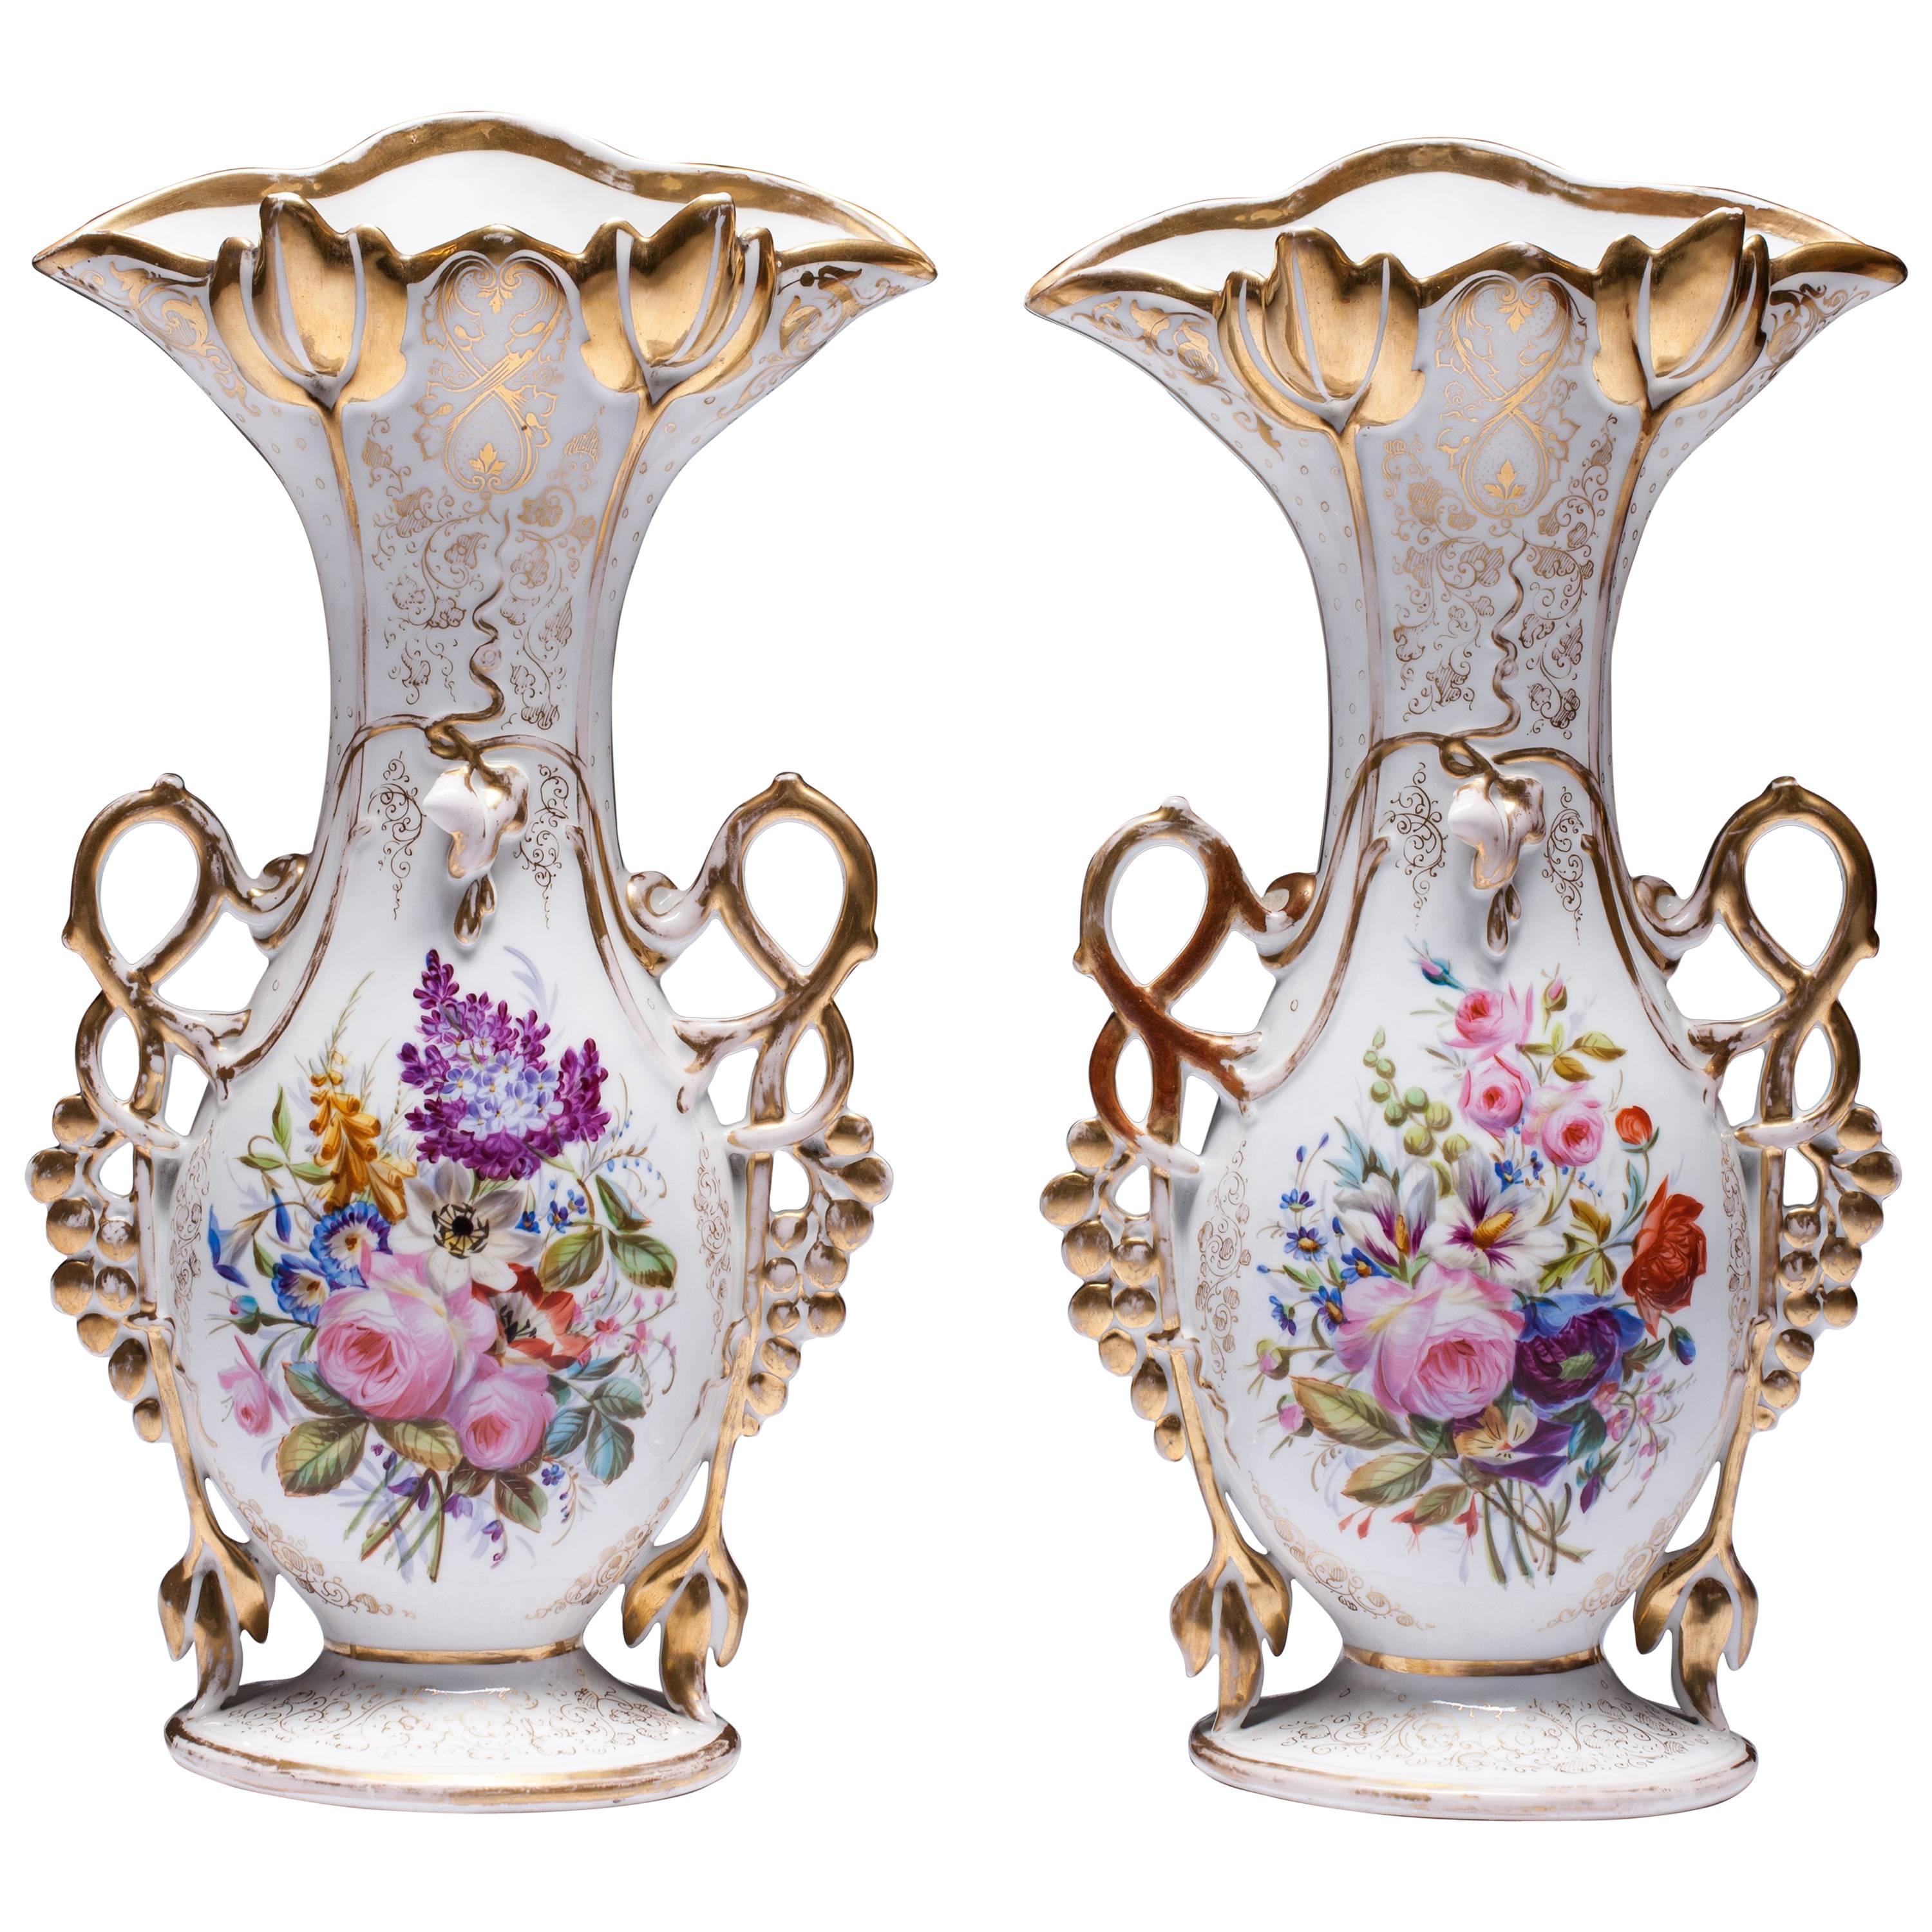 Porcelain Vases French 19th Century in Well Known Vieux Paris Porcelain Floral